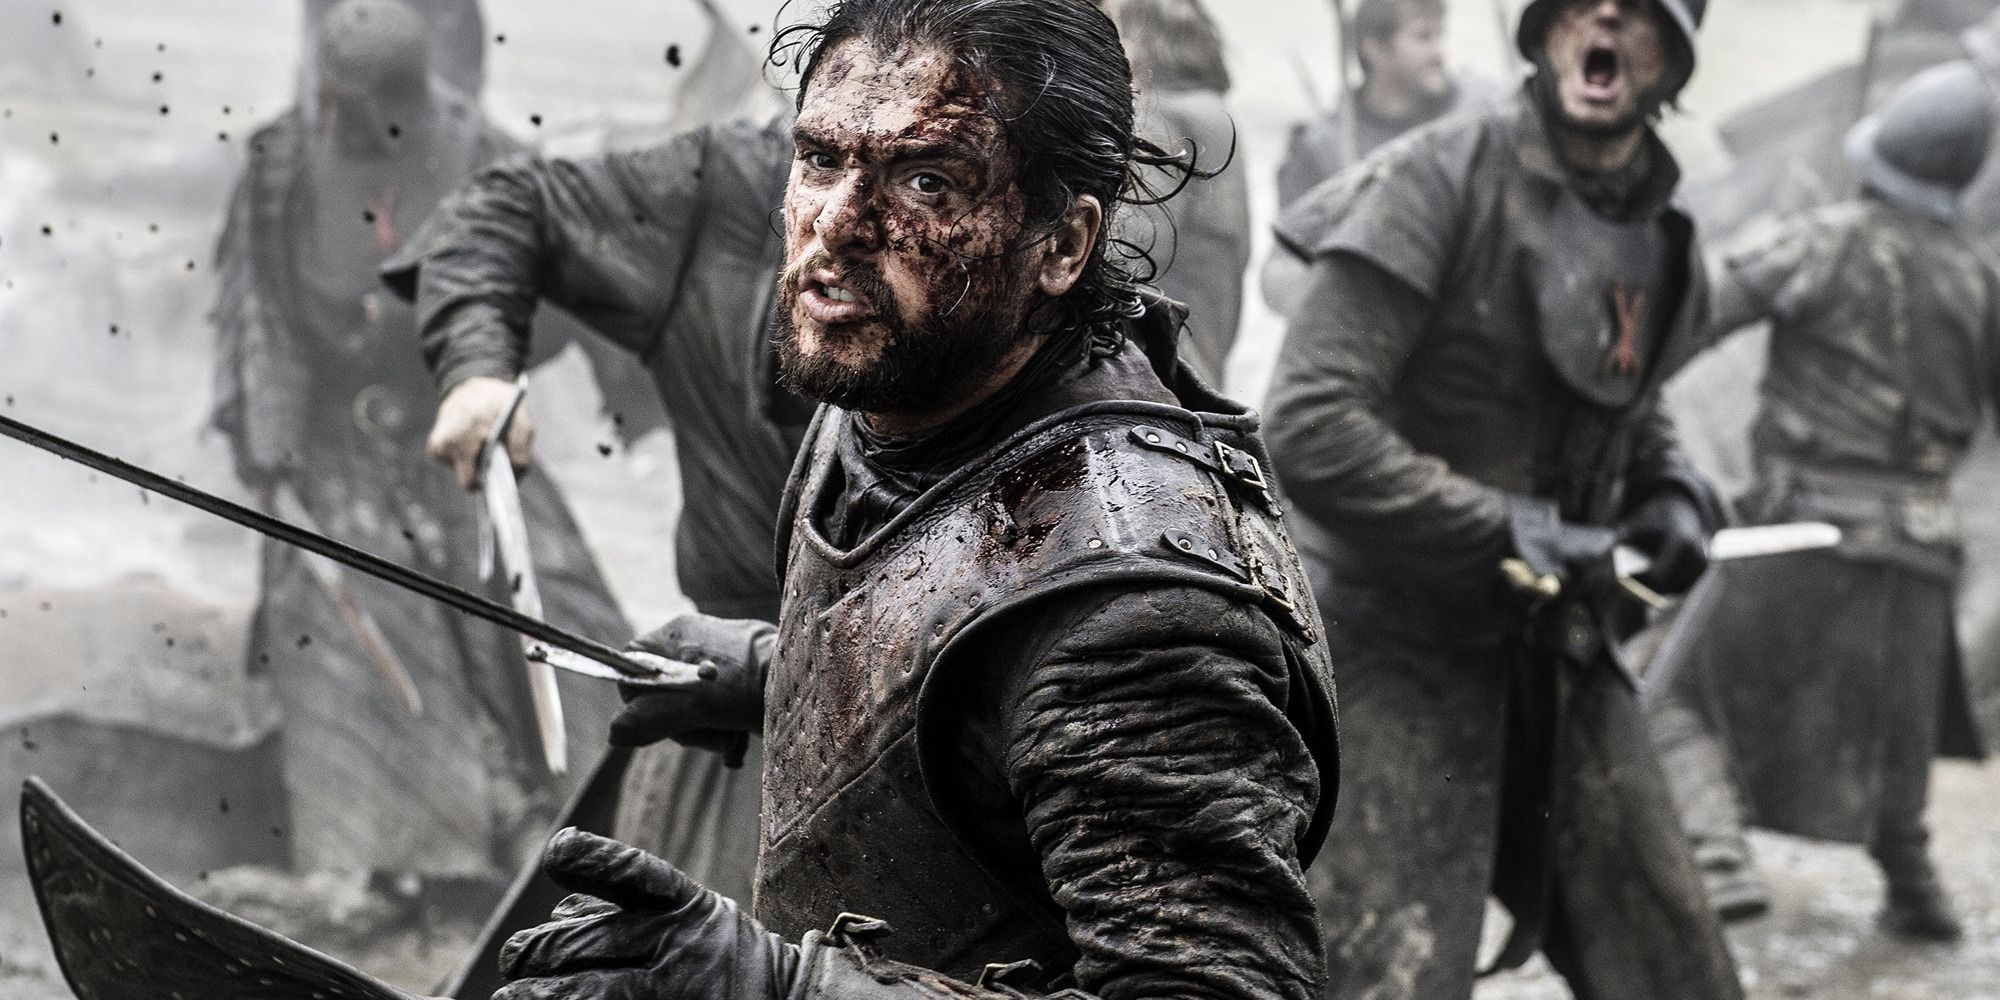 Jon Snow in the Battle of the Bastards, bloodied face and sword in hand